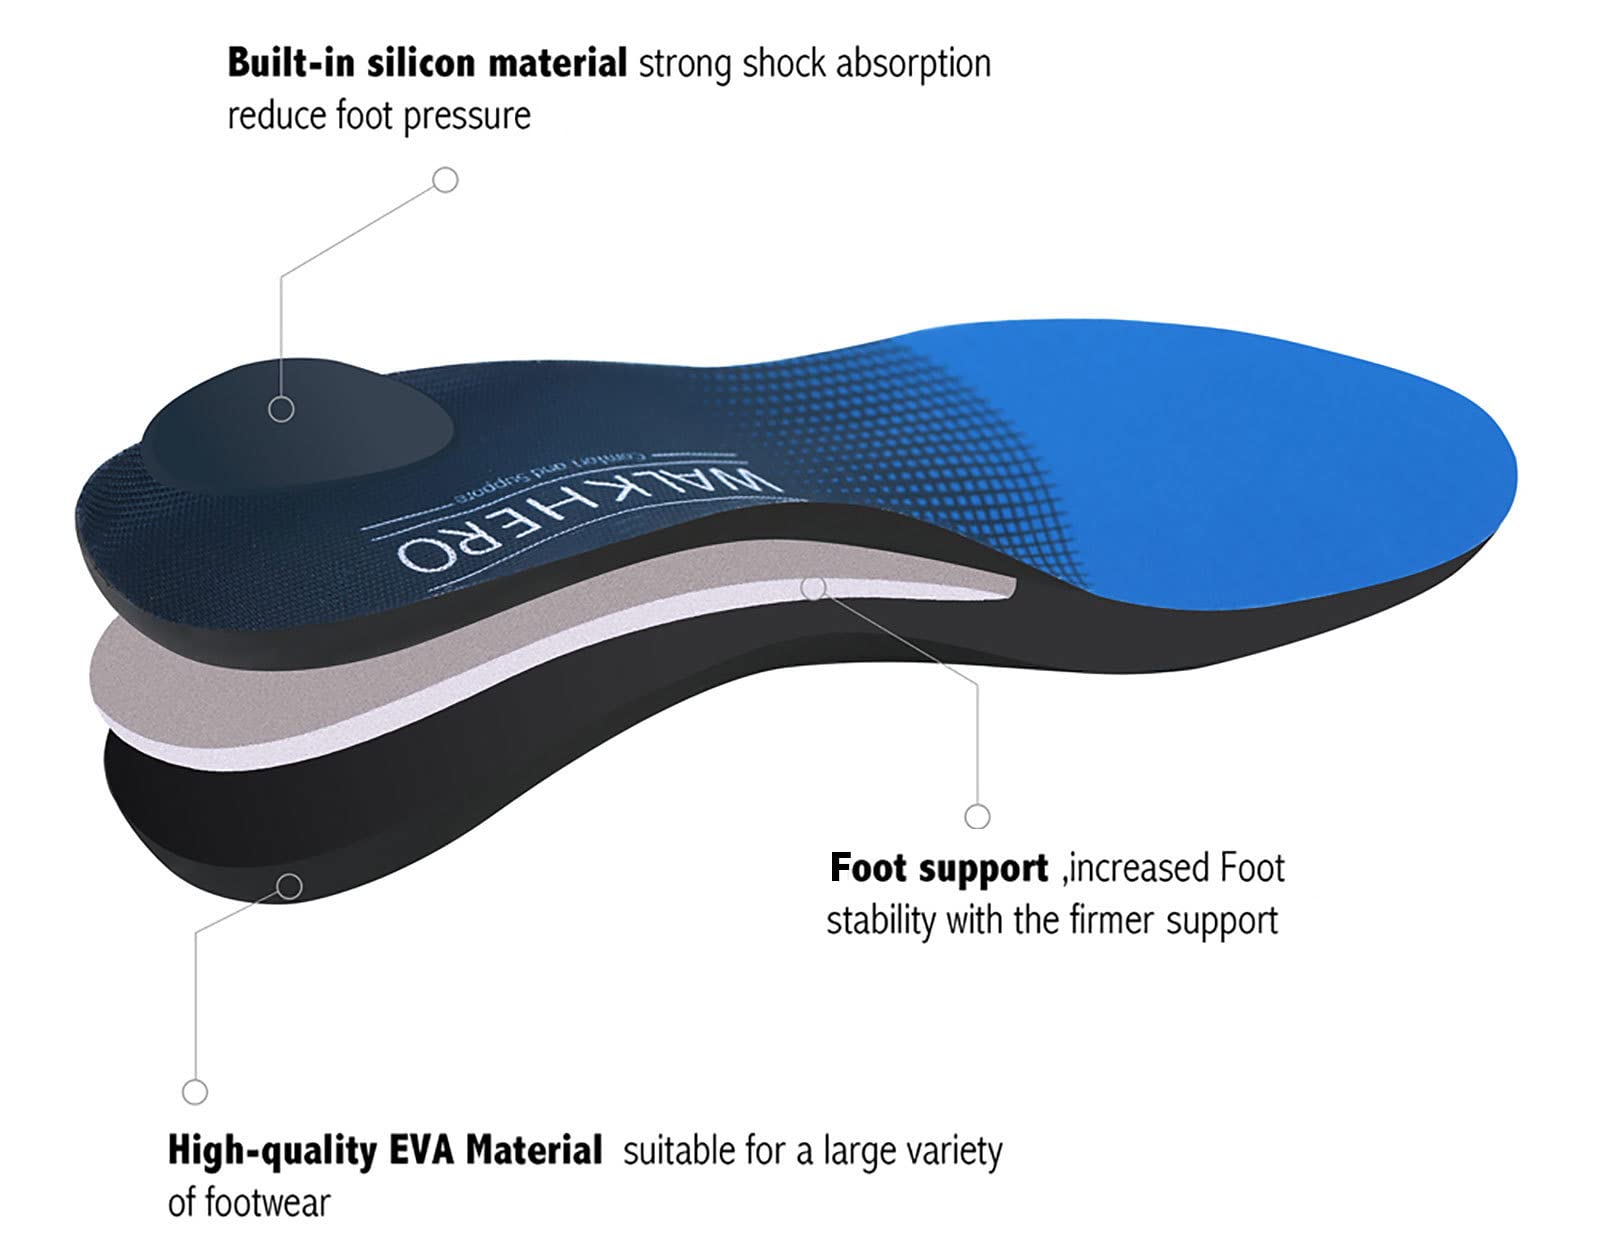 Plantar Fasciitis Feet Insoles Arch Supports Orthotics Inserts Relieve Flat Feet, High Arch, Foot Pain Mens 12-12 1/2 | Womens 14-14 1/2